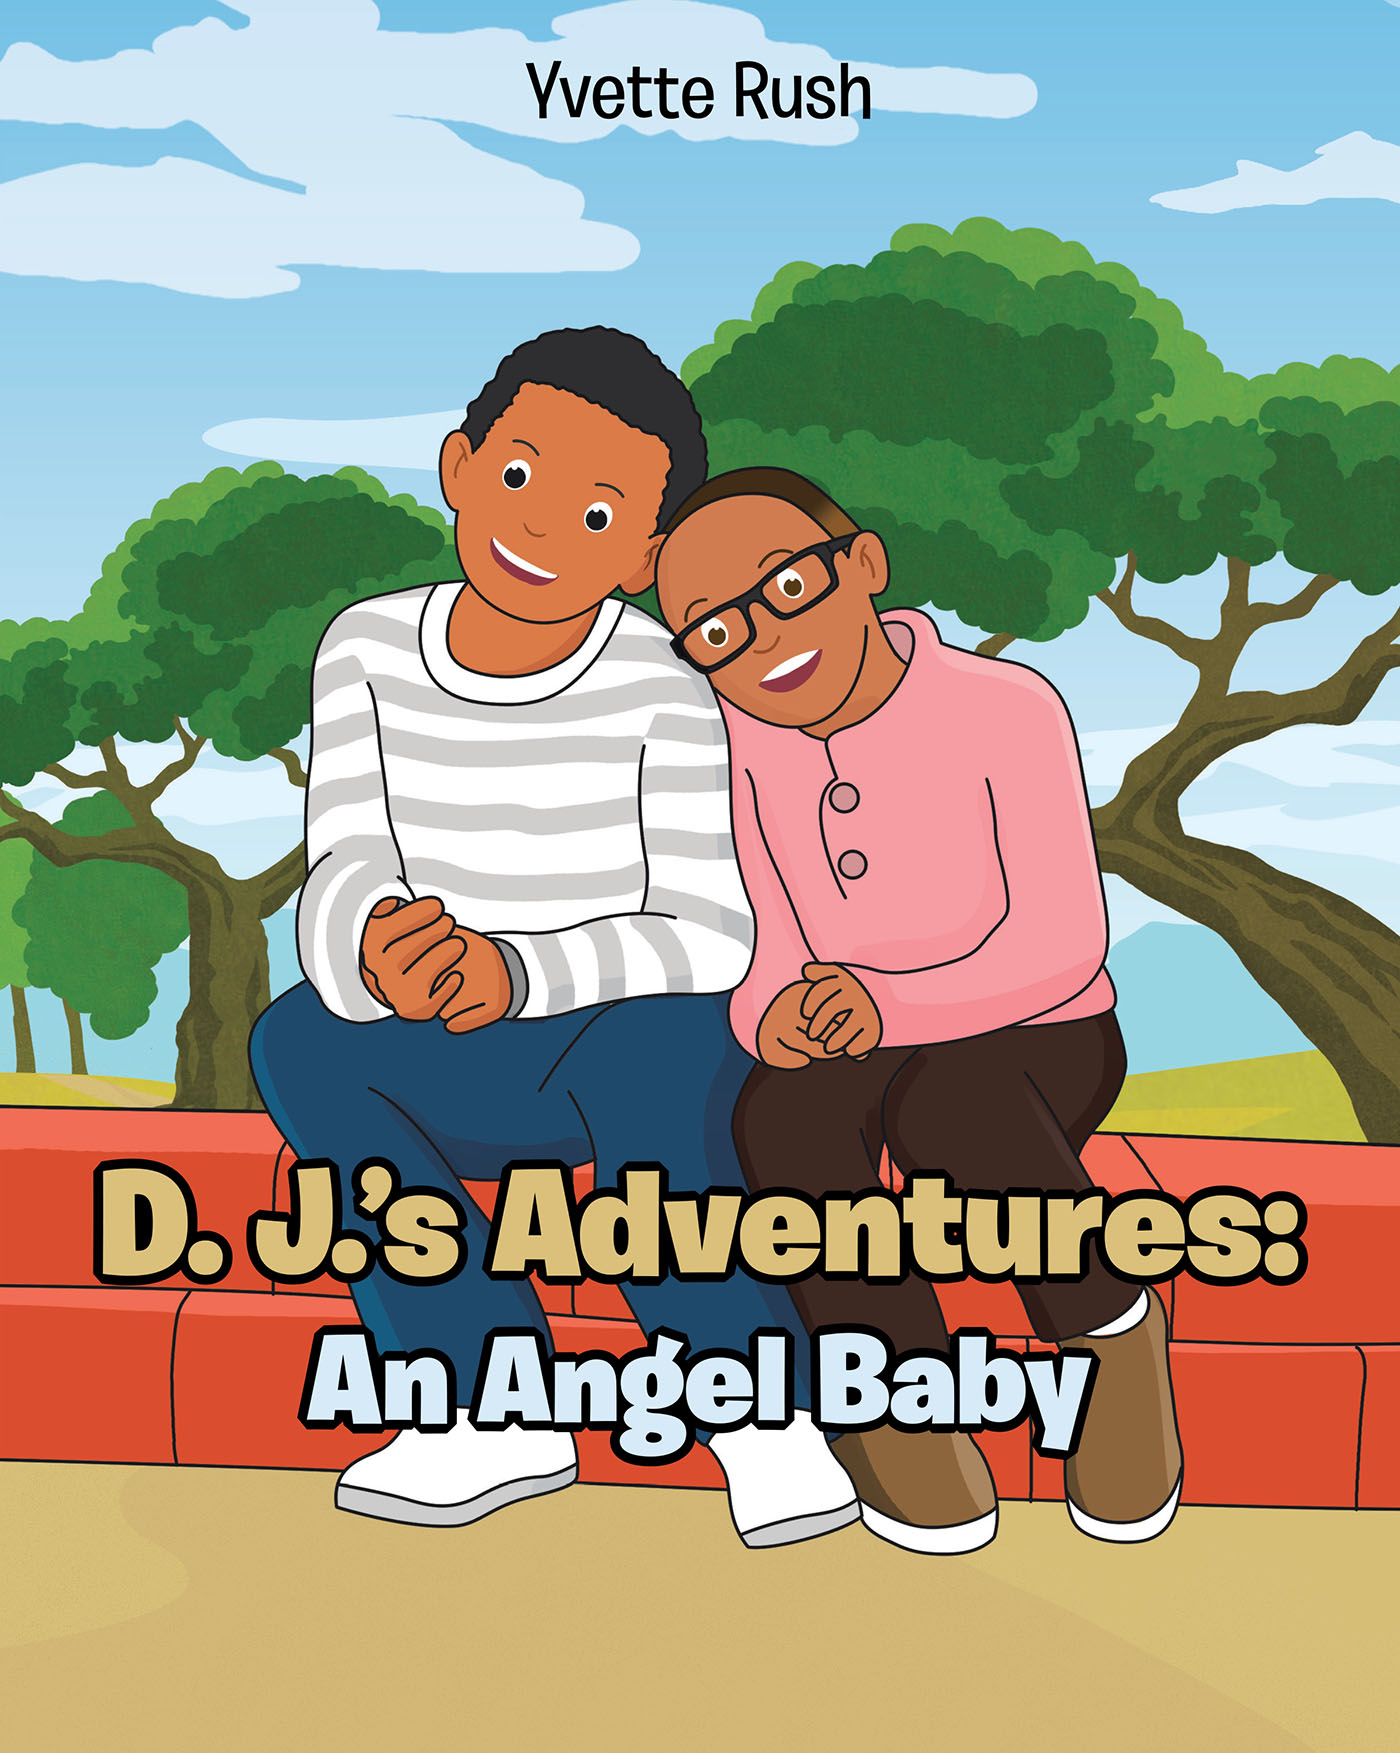 Yvette Rush’s Newly Released "D. J.’s Adventures: an Angel Baby" is a Sweet Story of Brothers with a Special Connection